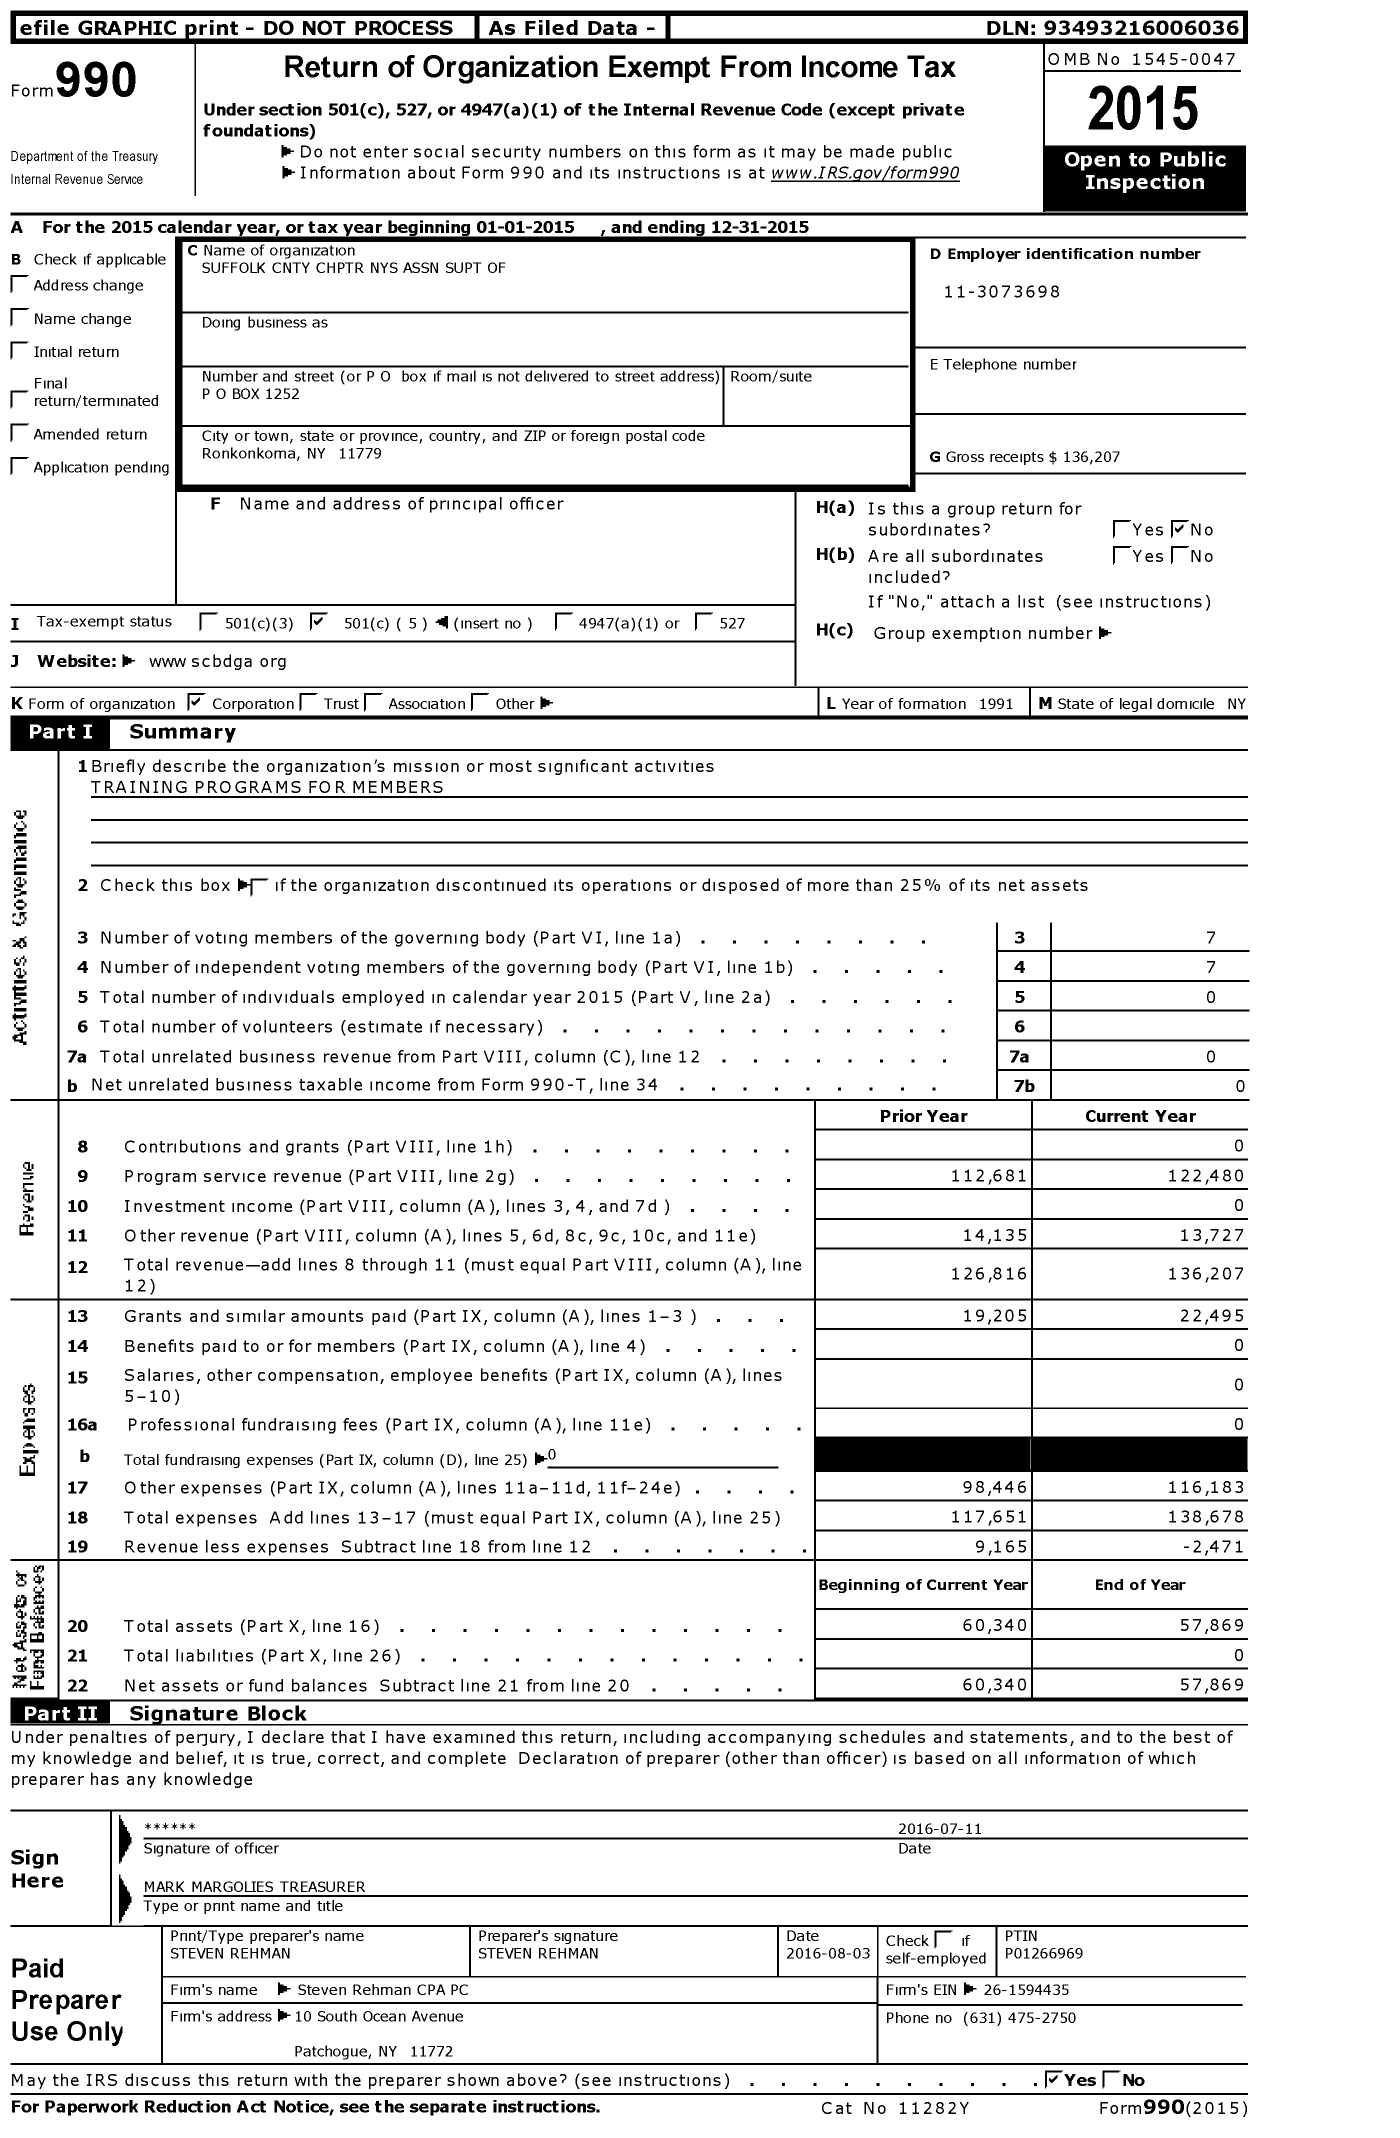 Image of first page of 2015 Form 990O for Suffolk County CHPTR Nys Association Supt of